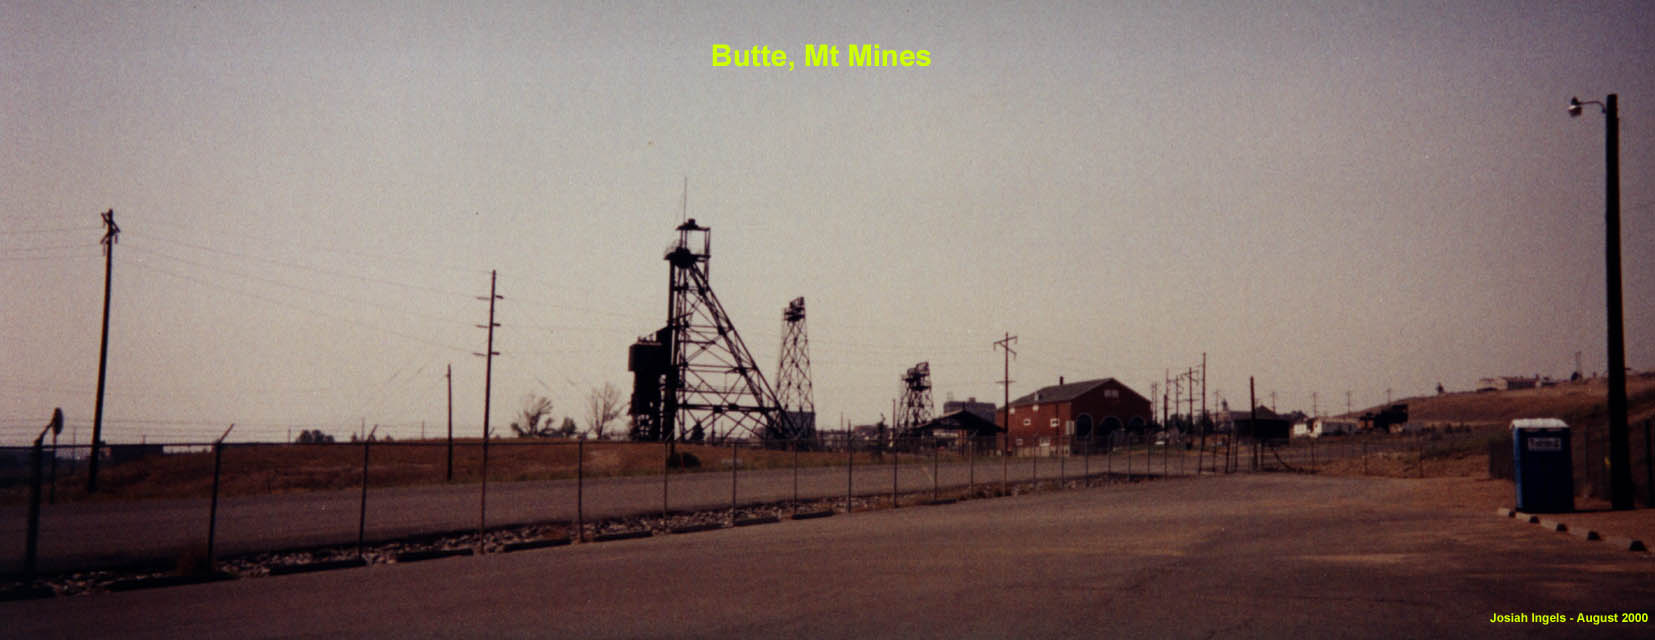 Butte Mines